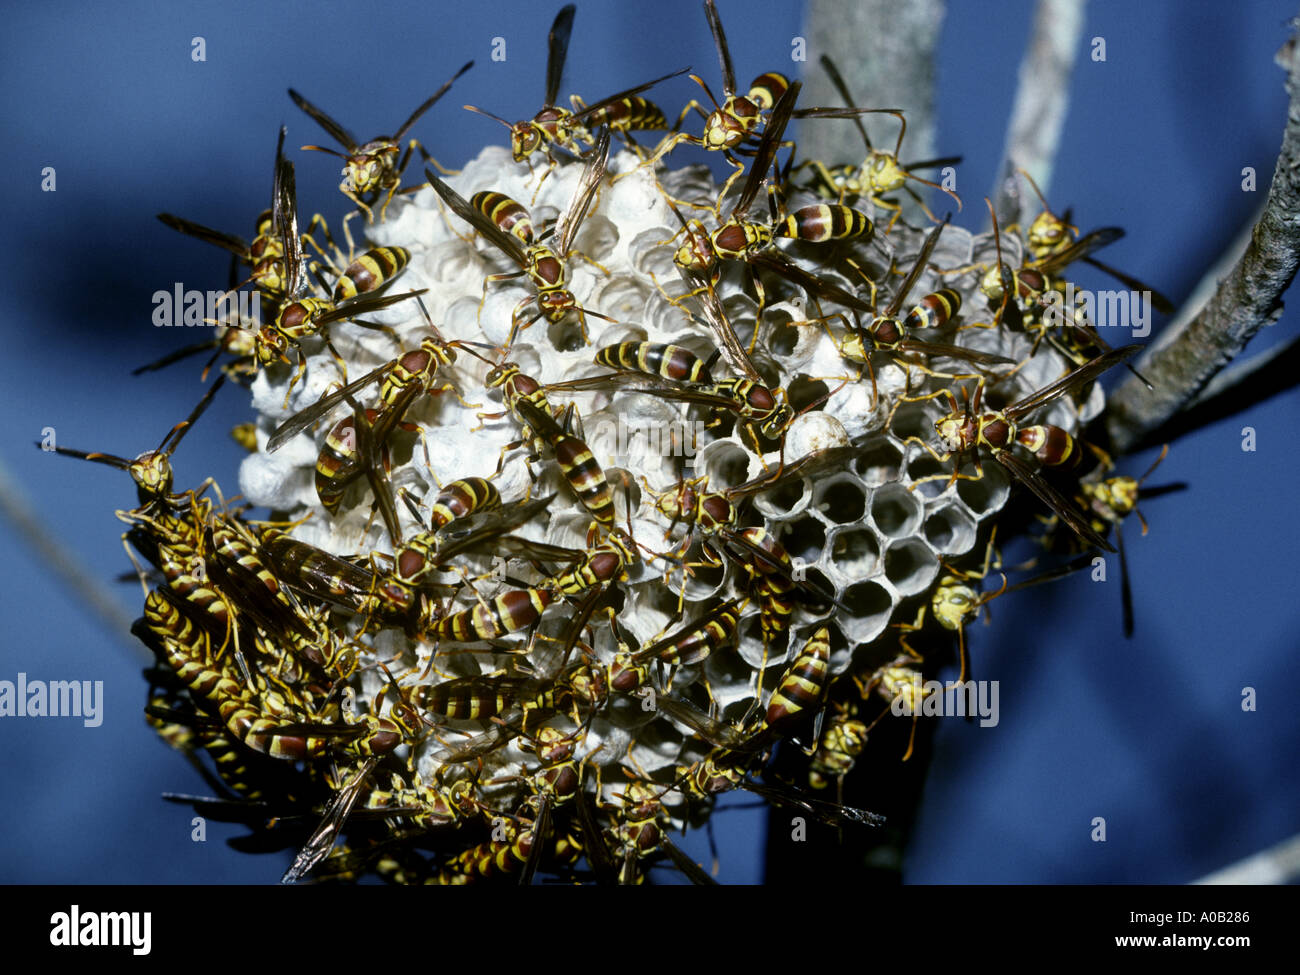 Paper Wasp Polistes Exclamans nest covered with paper wasp Stock Photo